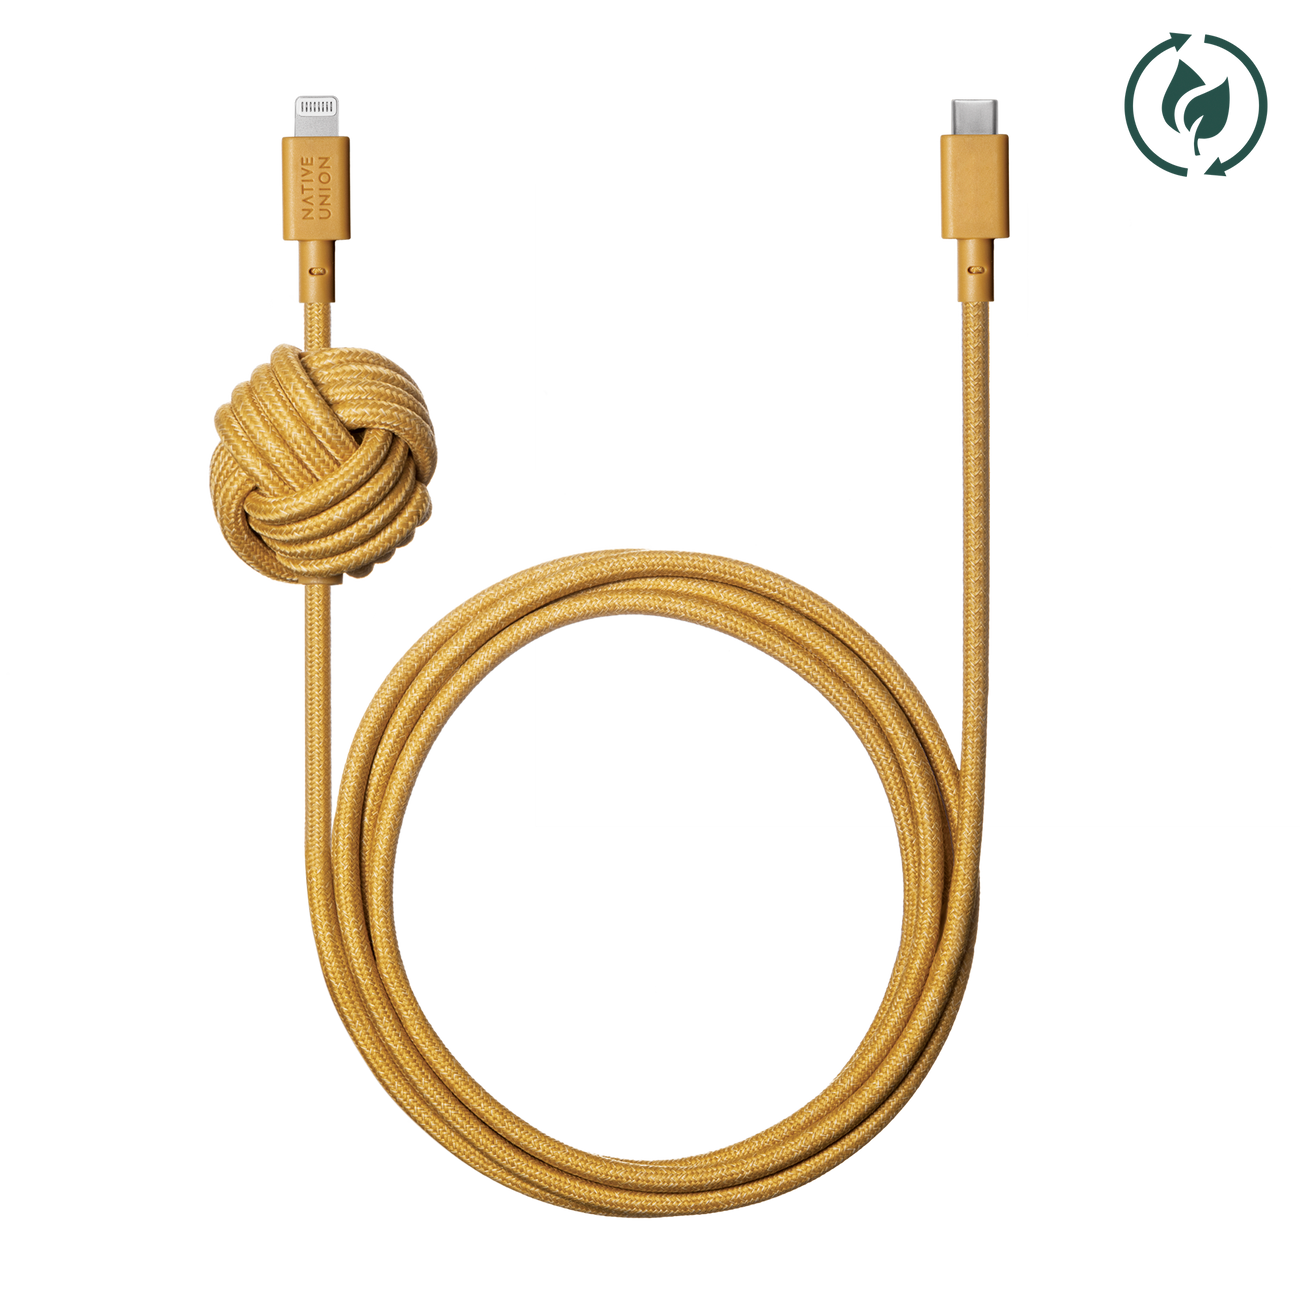 Lightning to USB-C Cable, iPhone Cable GOLD